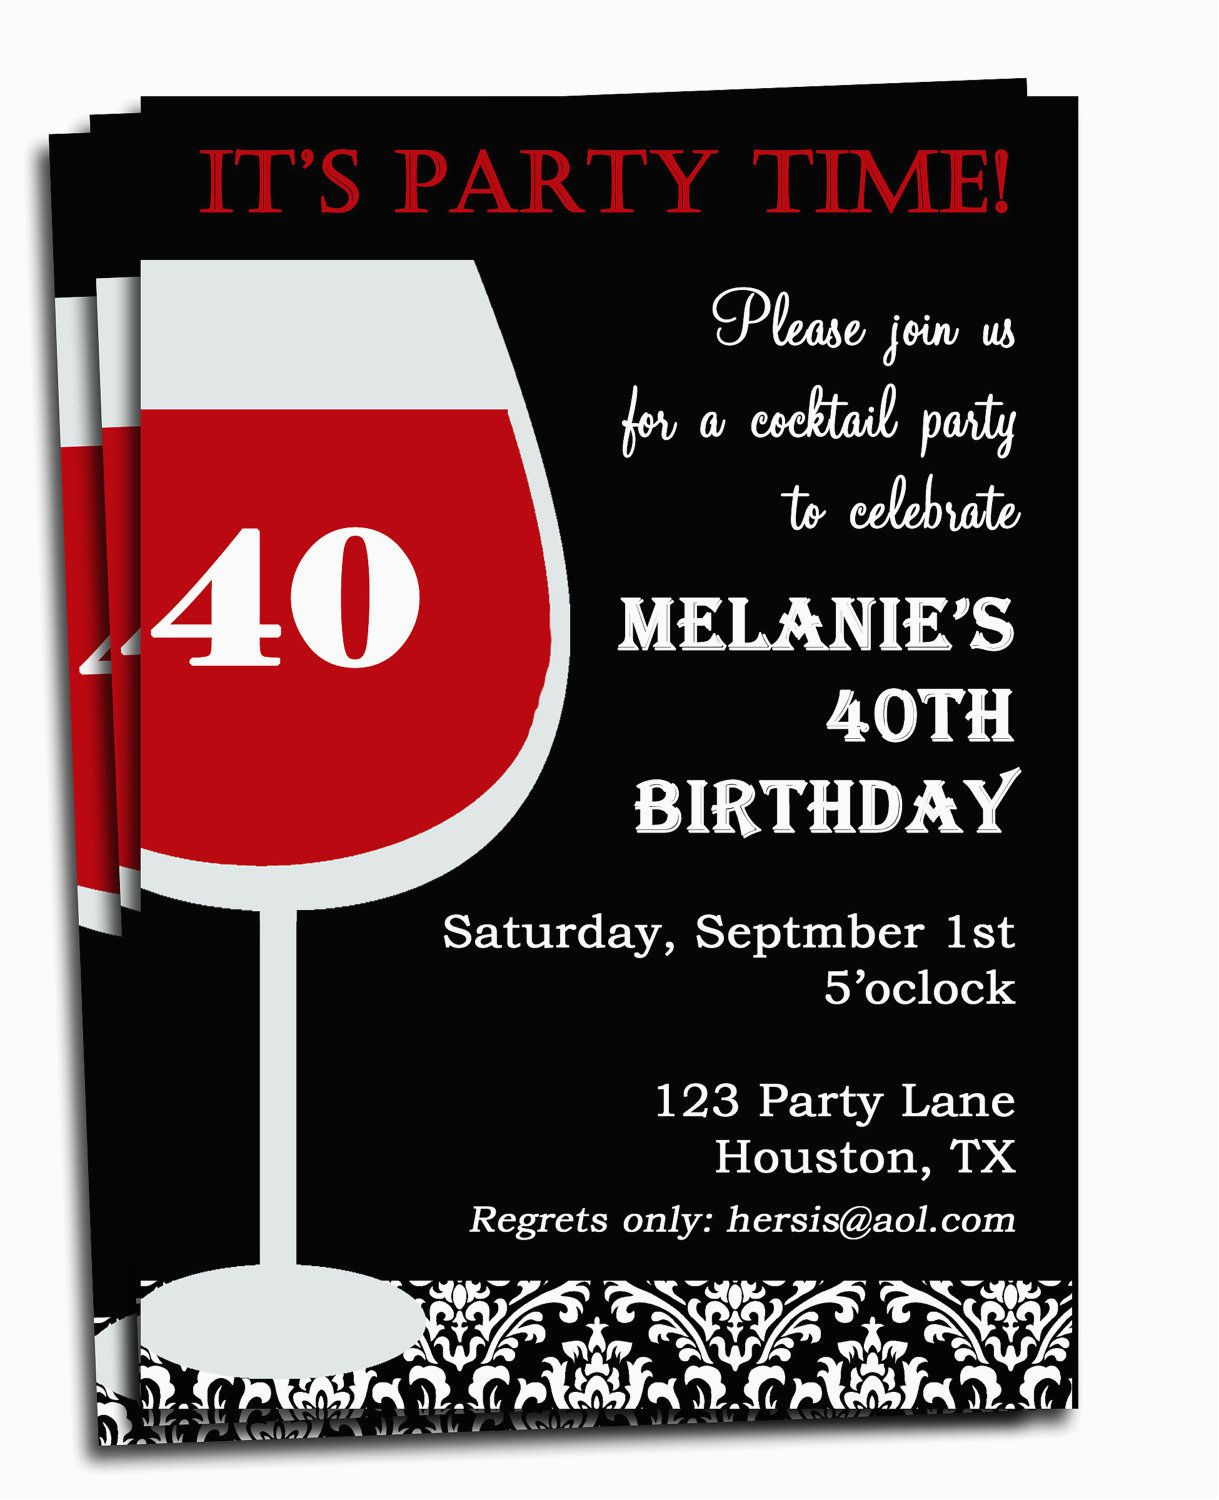 Funny Birthday Invites for Adults Funny Birthday Invites for Adults Funny Birthday Party